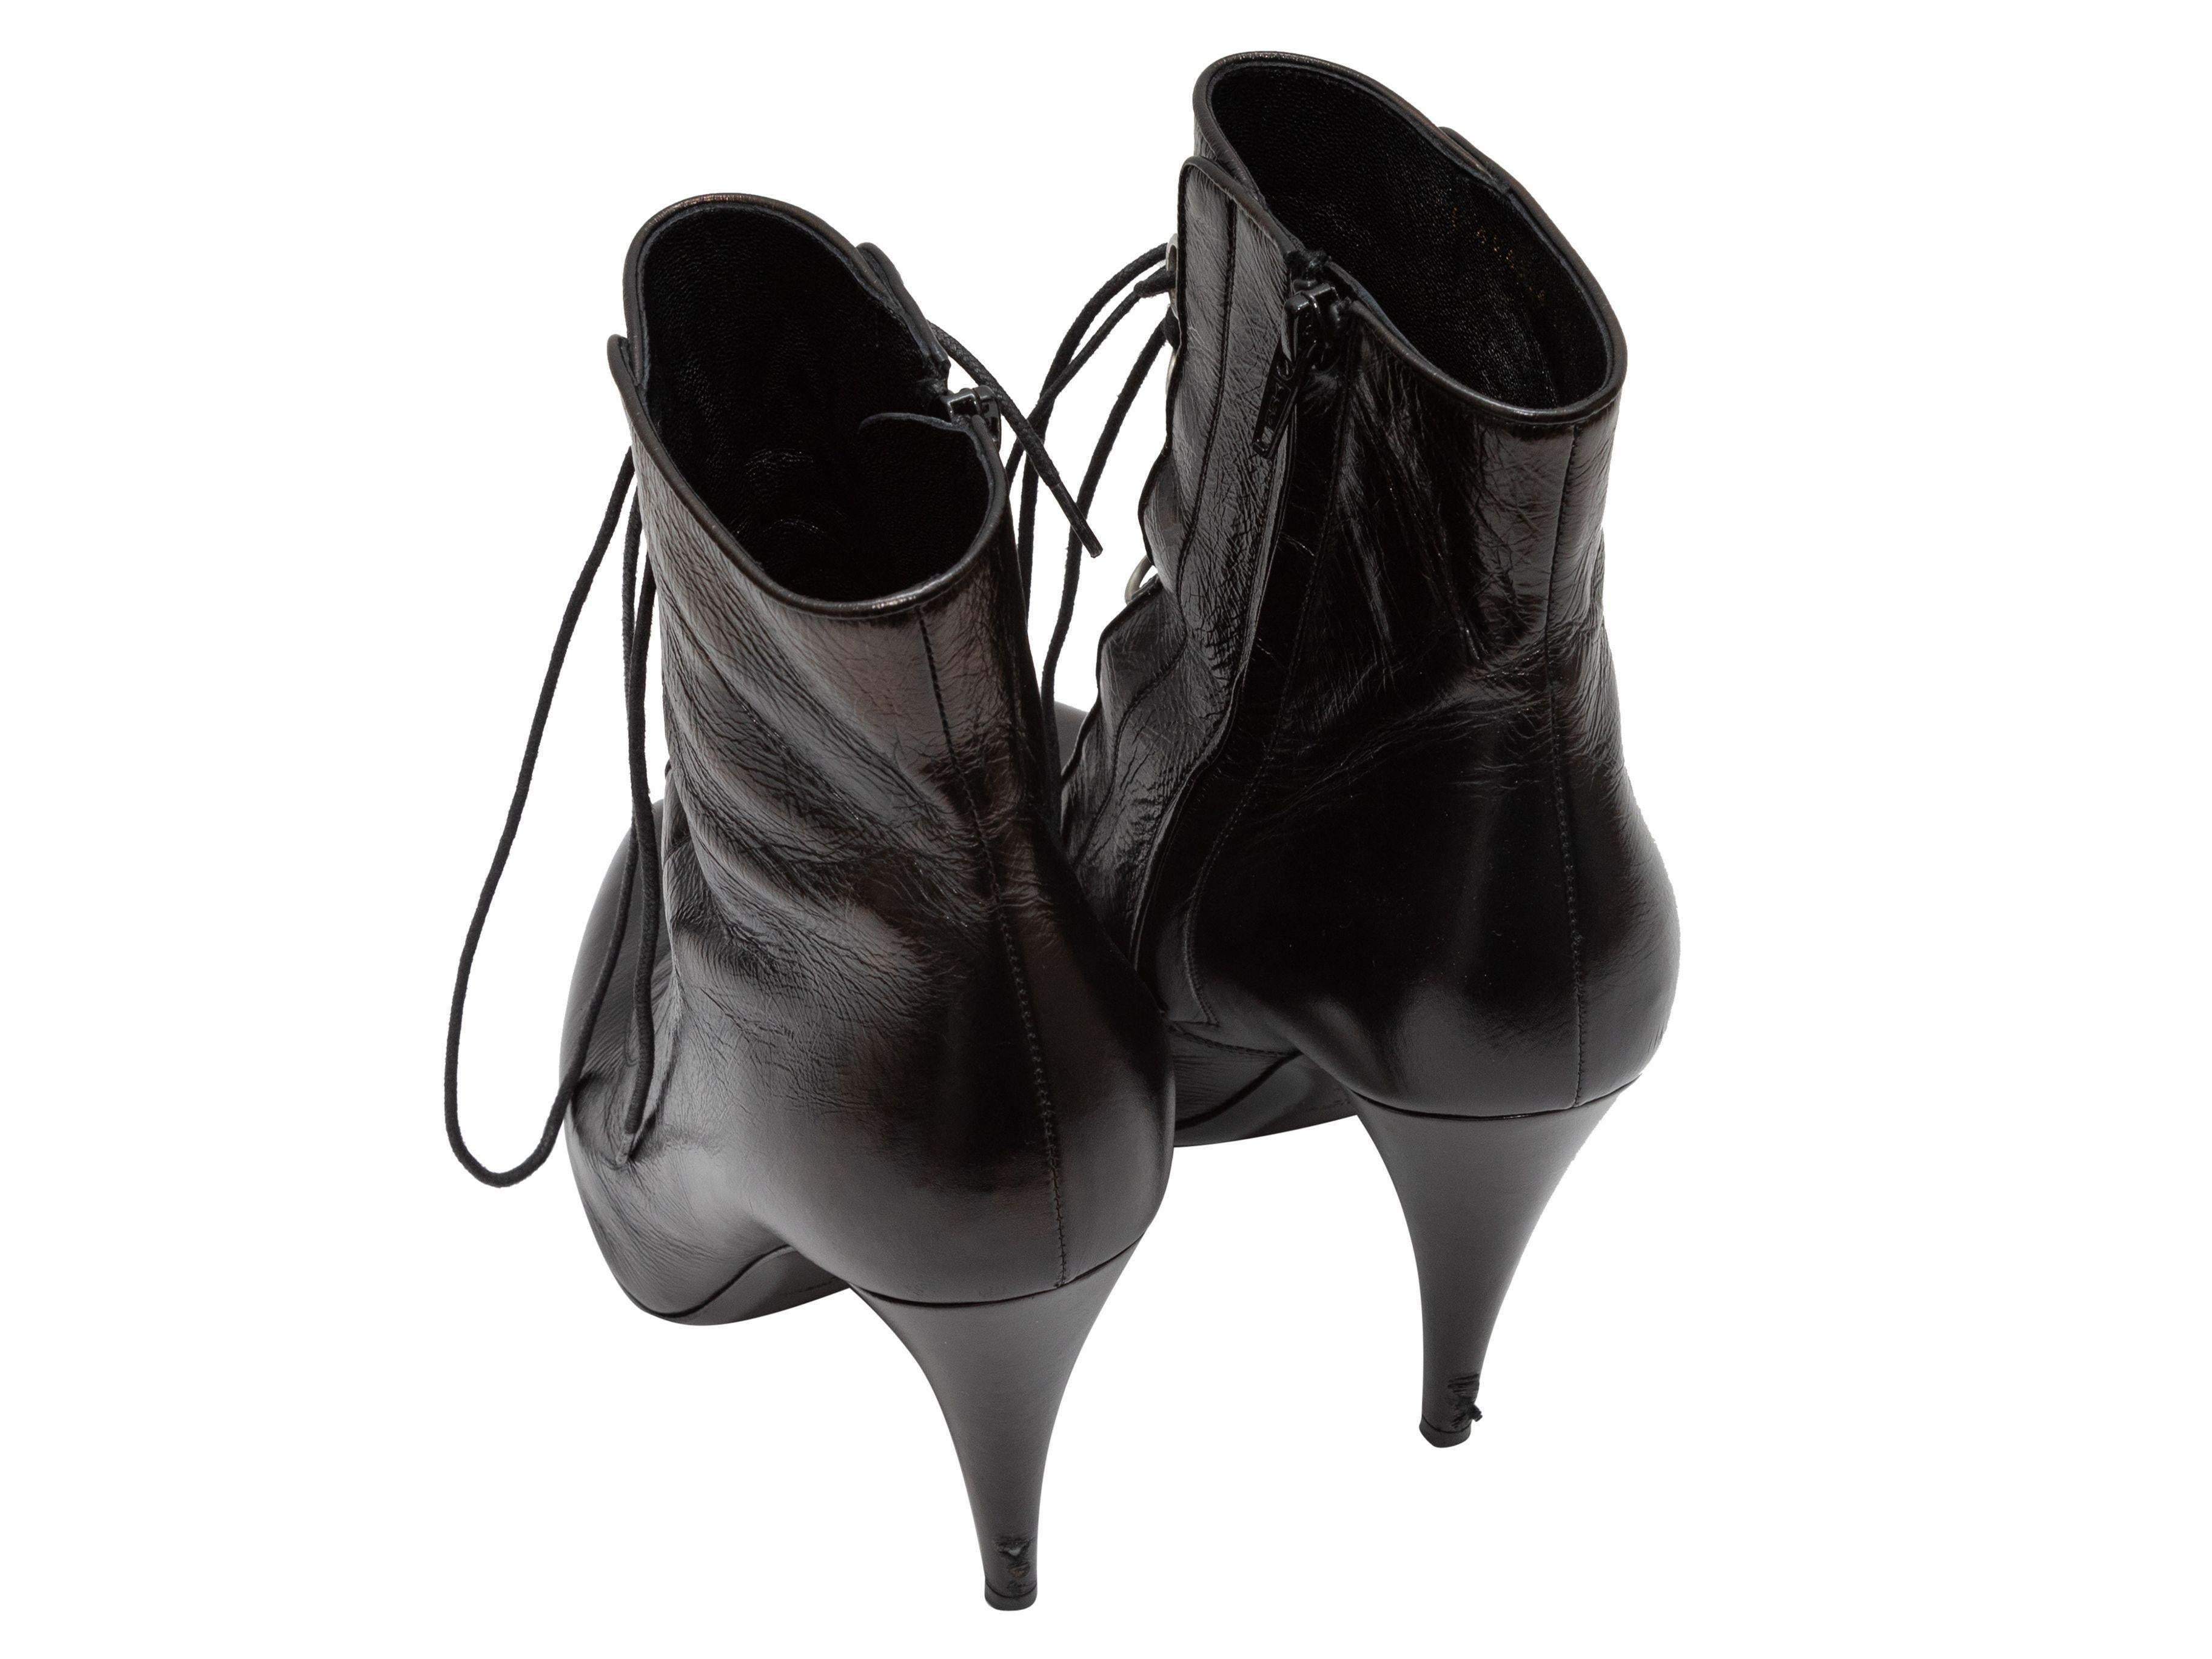 Women's Saint Laurent Black Pointed-Toe Heeled Ankle Boots